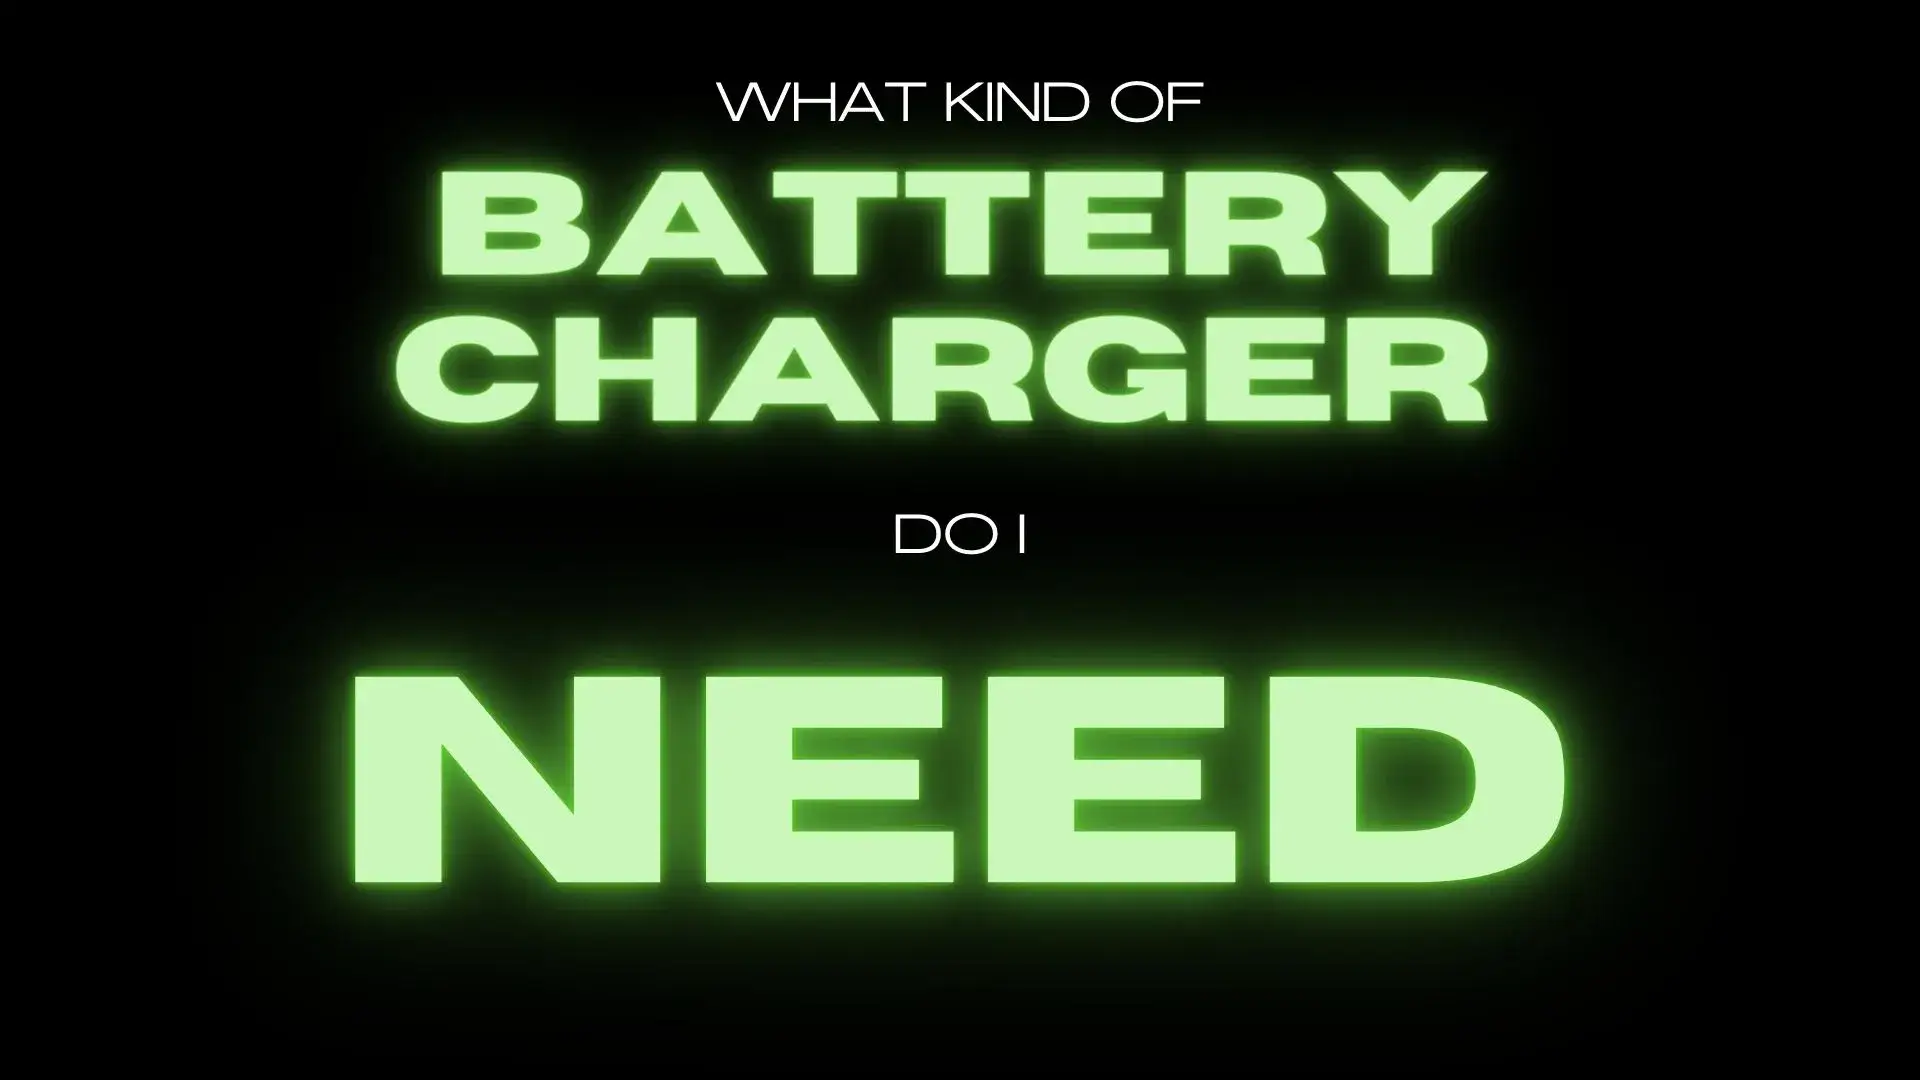 what kind of battery charger do i need